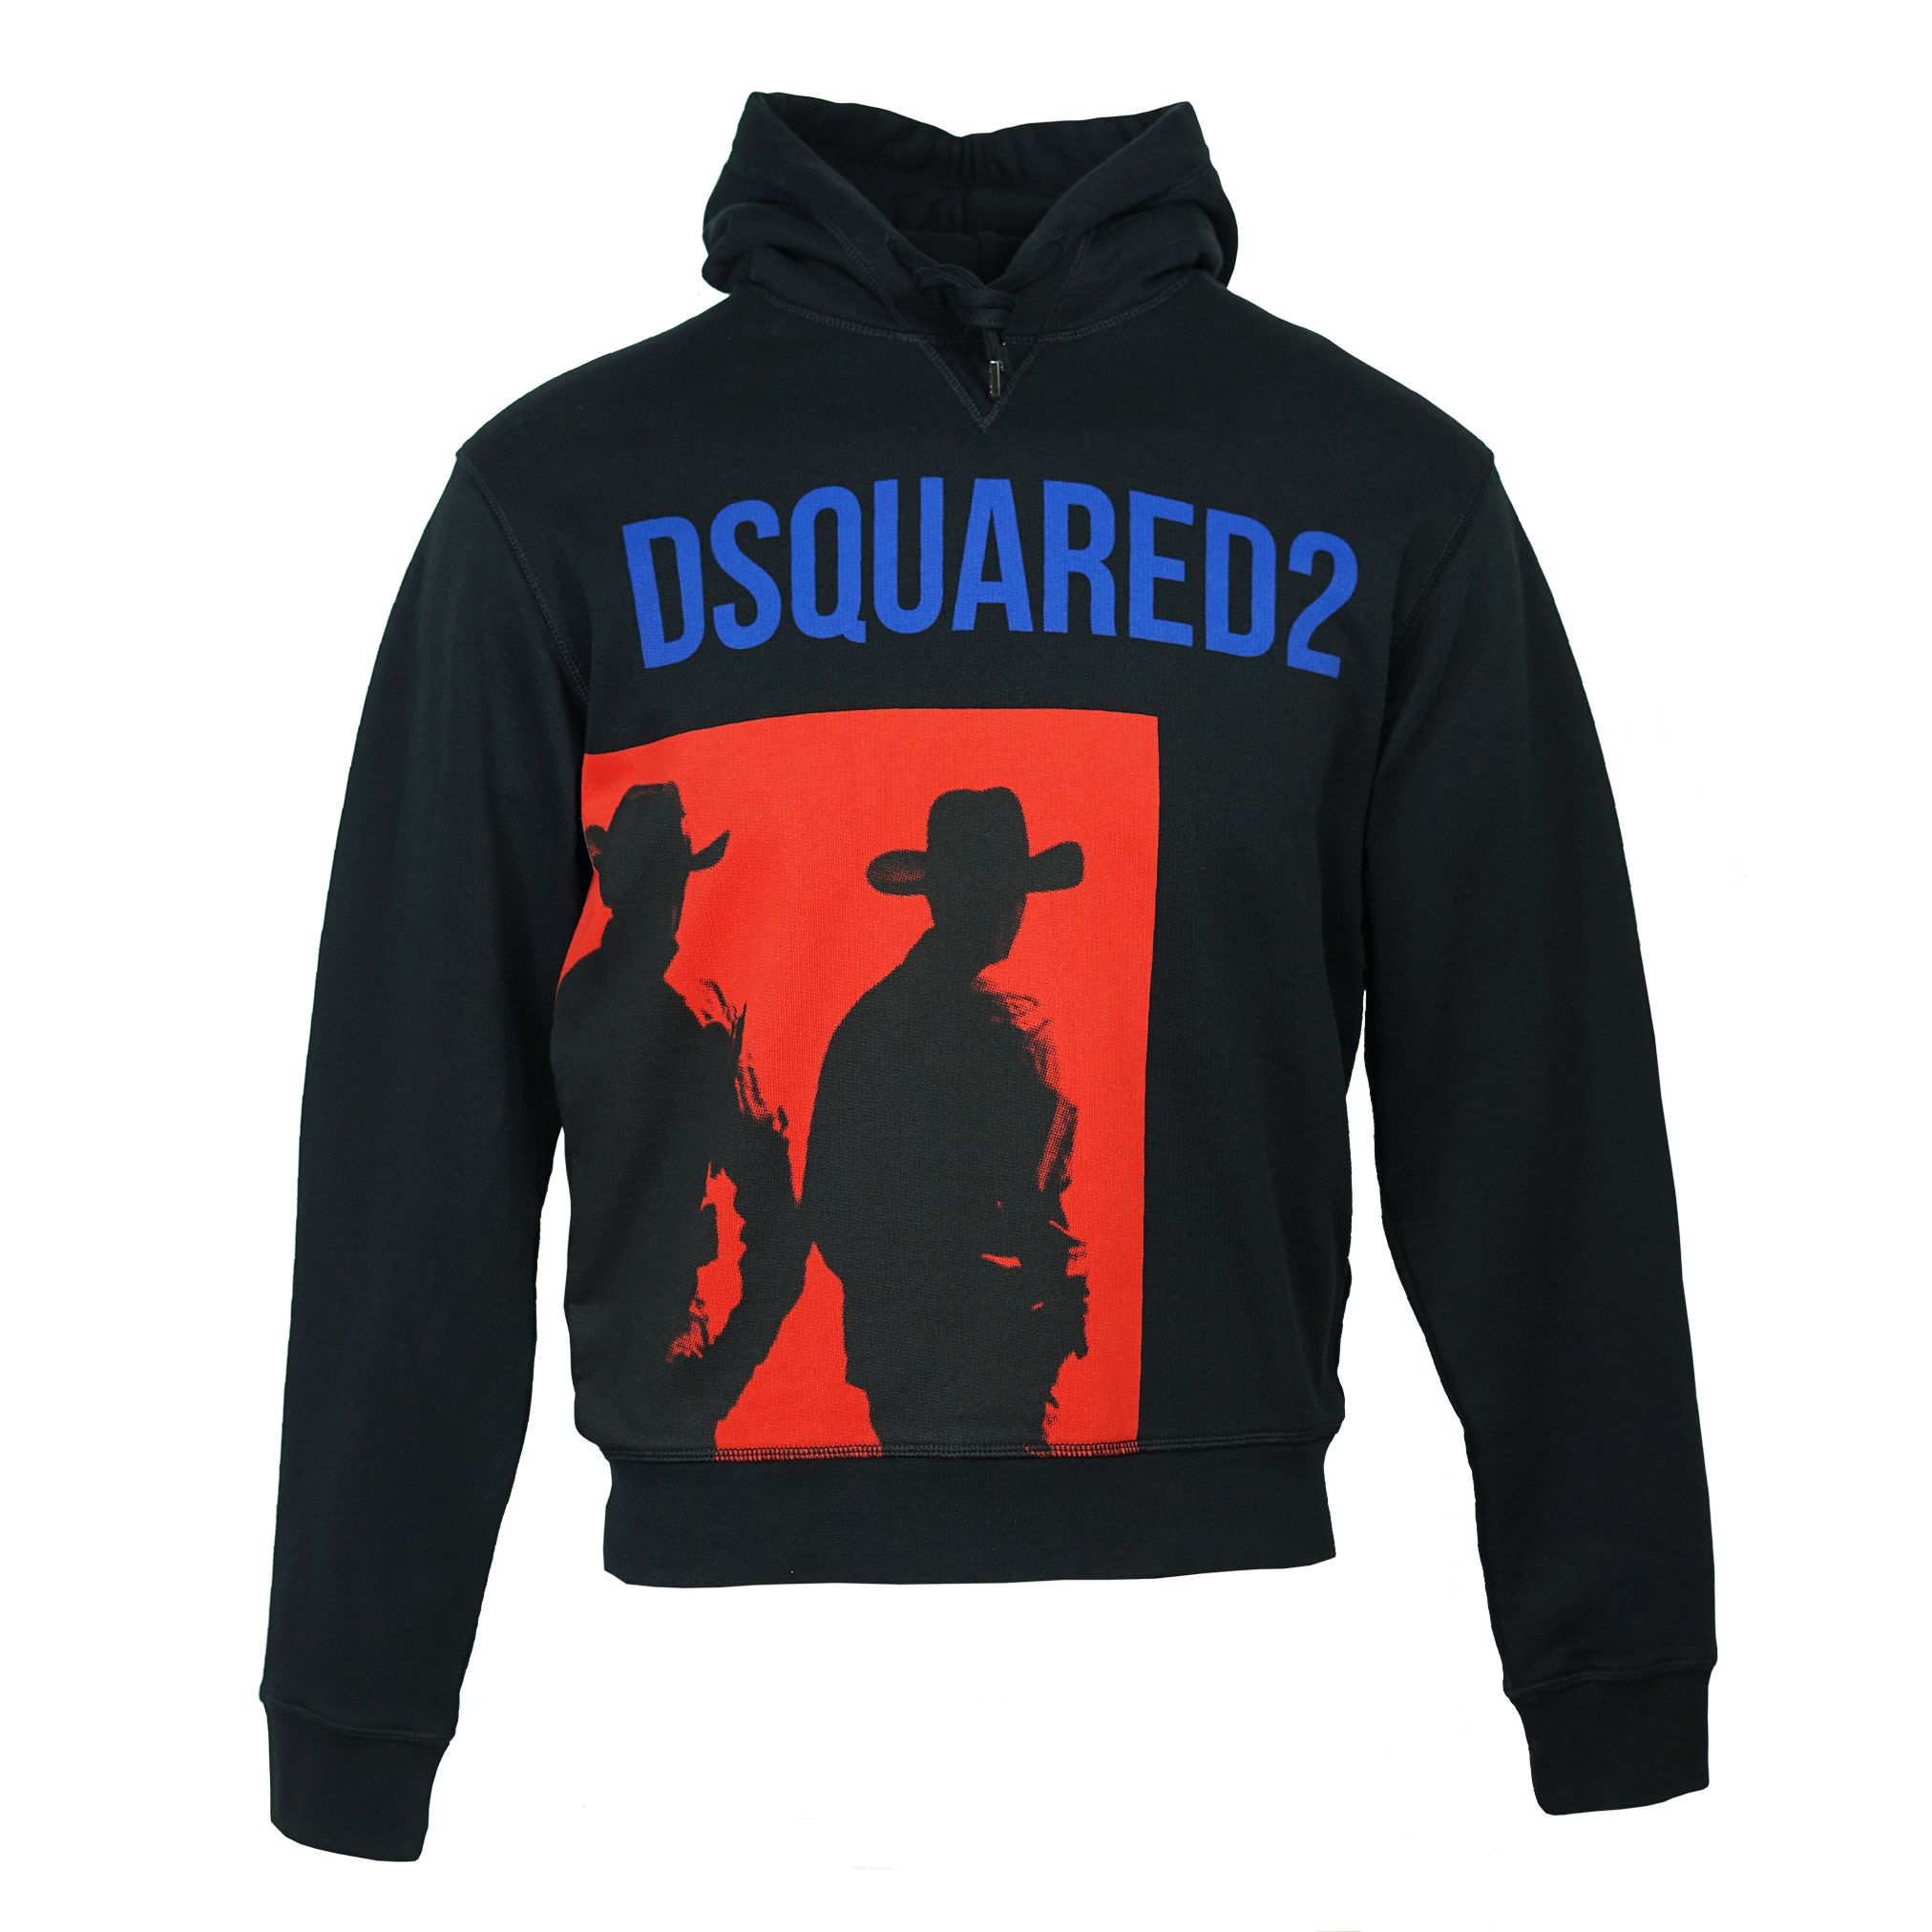 DSquared2 S71GU0253 900 Hoodie. DSquared2 Black Hoodie. Large Graphic Motif On Front. 55% Viscose, 45% Cotton. Made In Italy. Elasticated Waistband and Sleeves